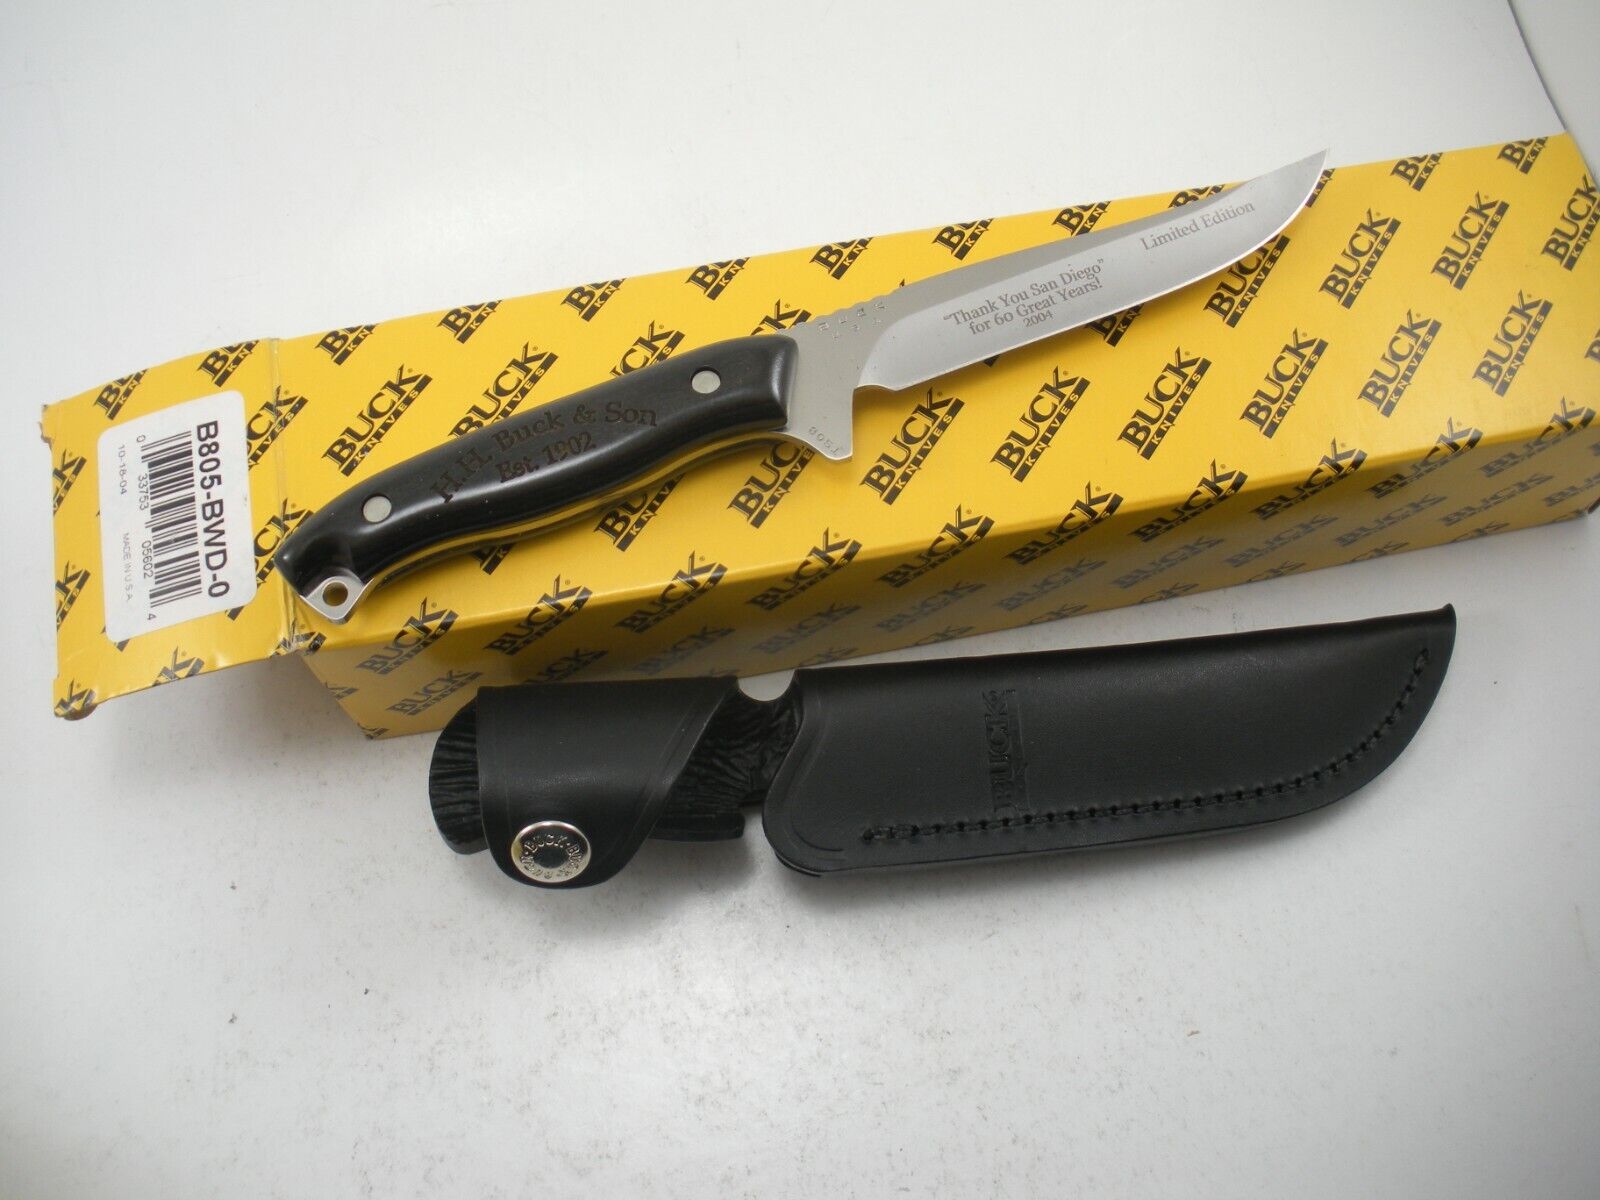 BUCK 805 LIMITED EDITION THANK YOU SAN DIEGO KNIFE NEVER USED IN BOX